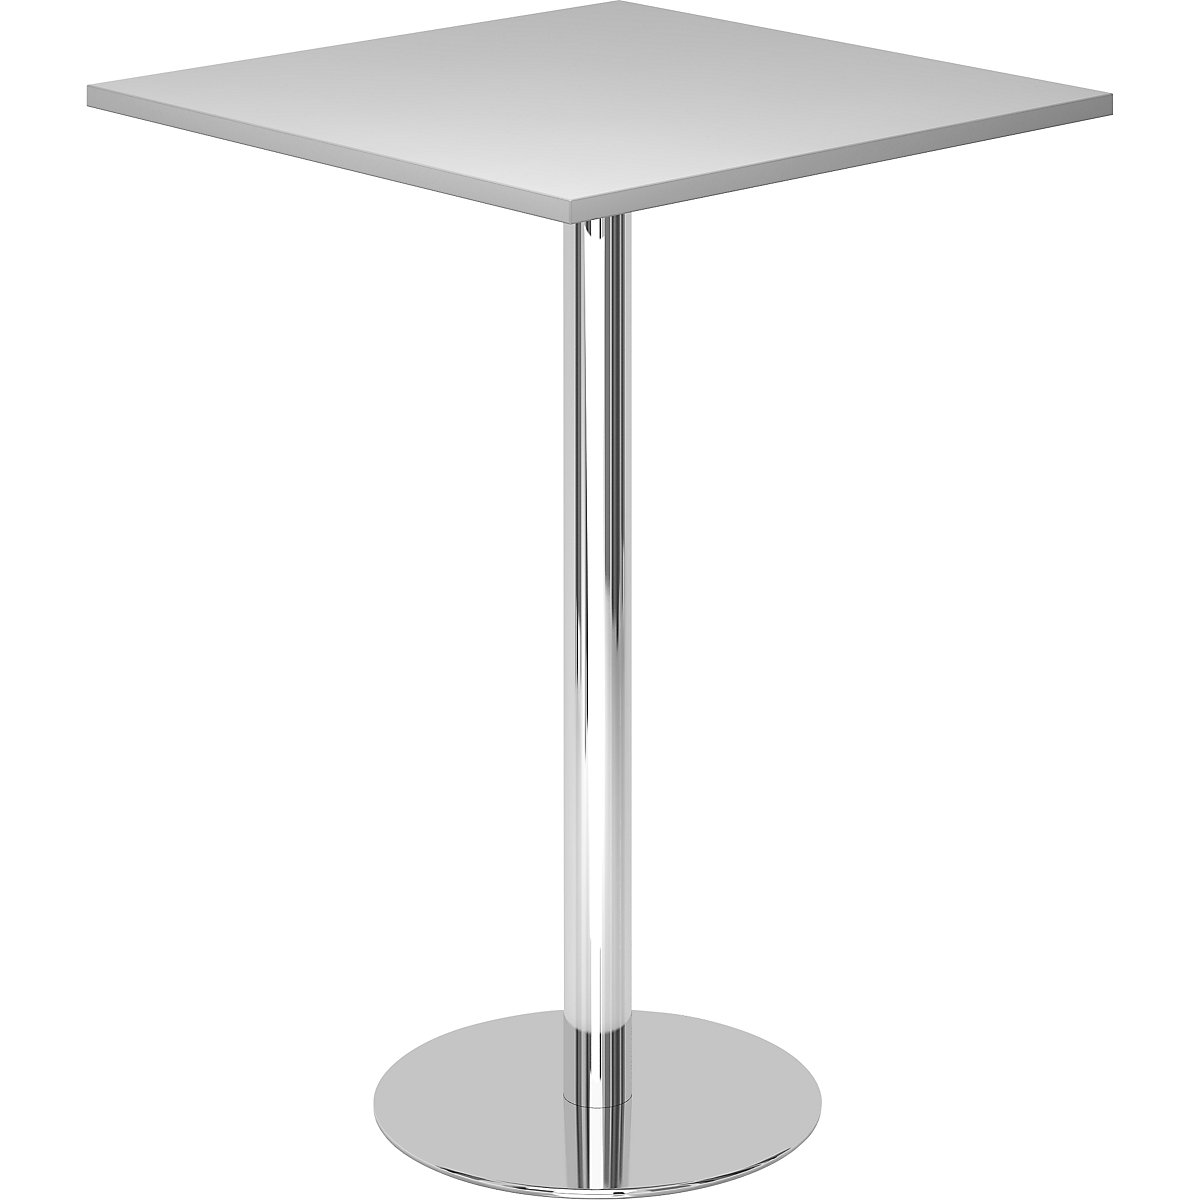 Pedestal table, LxW 800 x 800 mm, 1116 mm high, chrome plated frame, tabletop in light grey-7